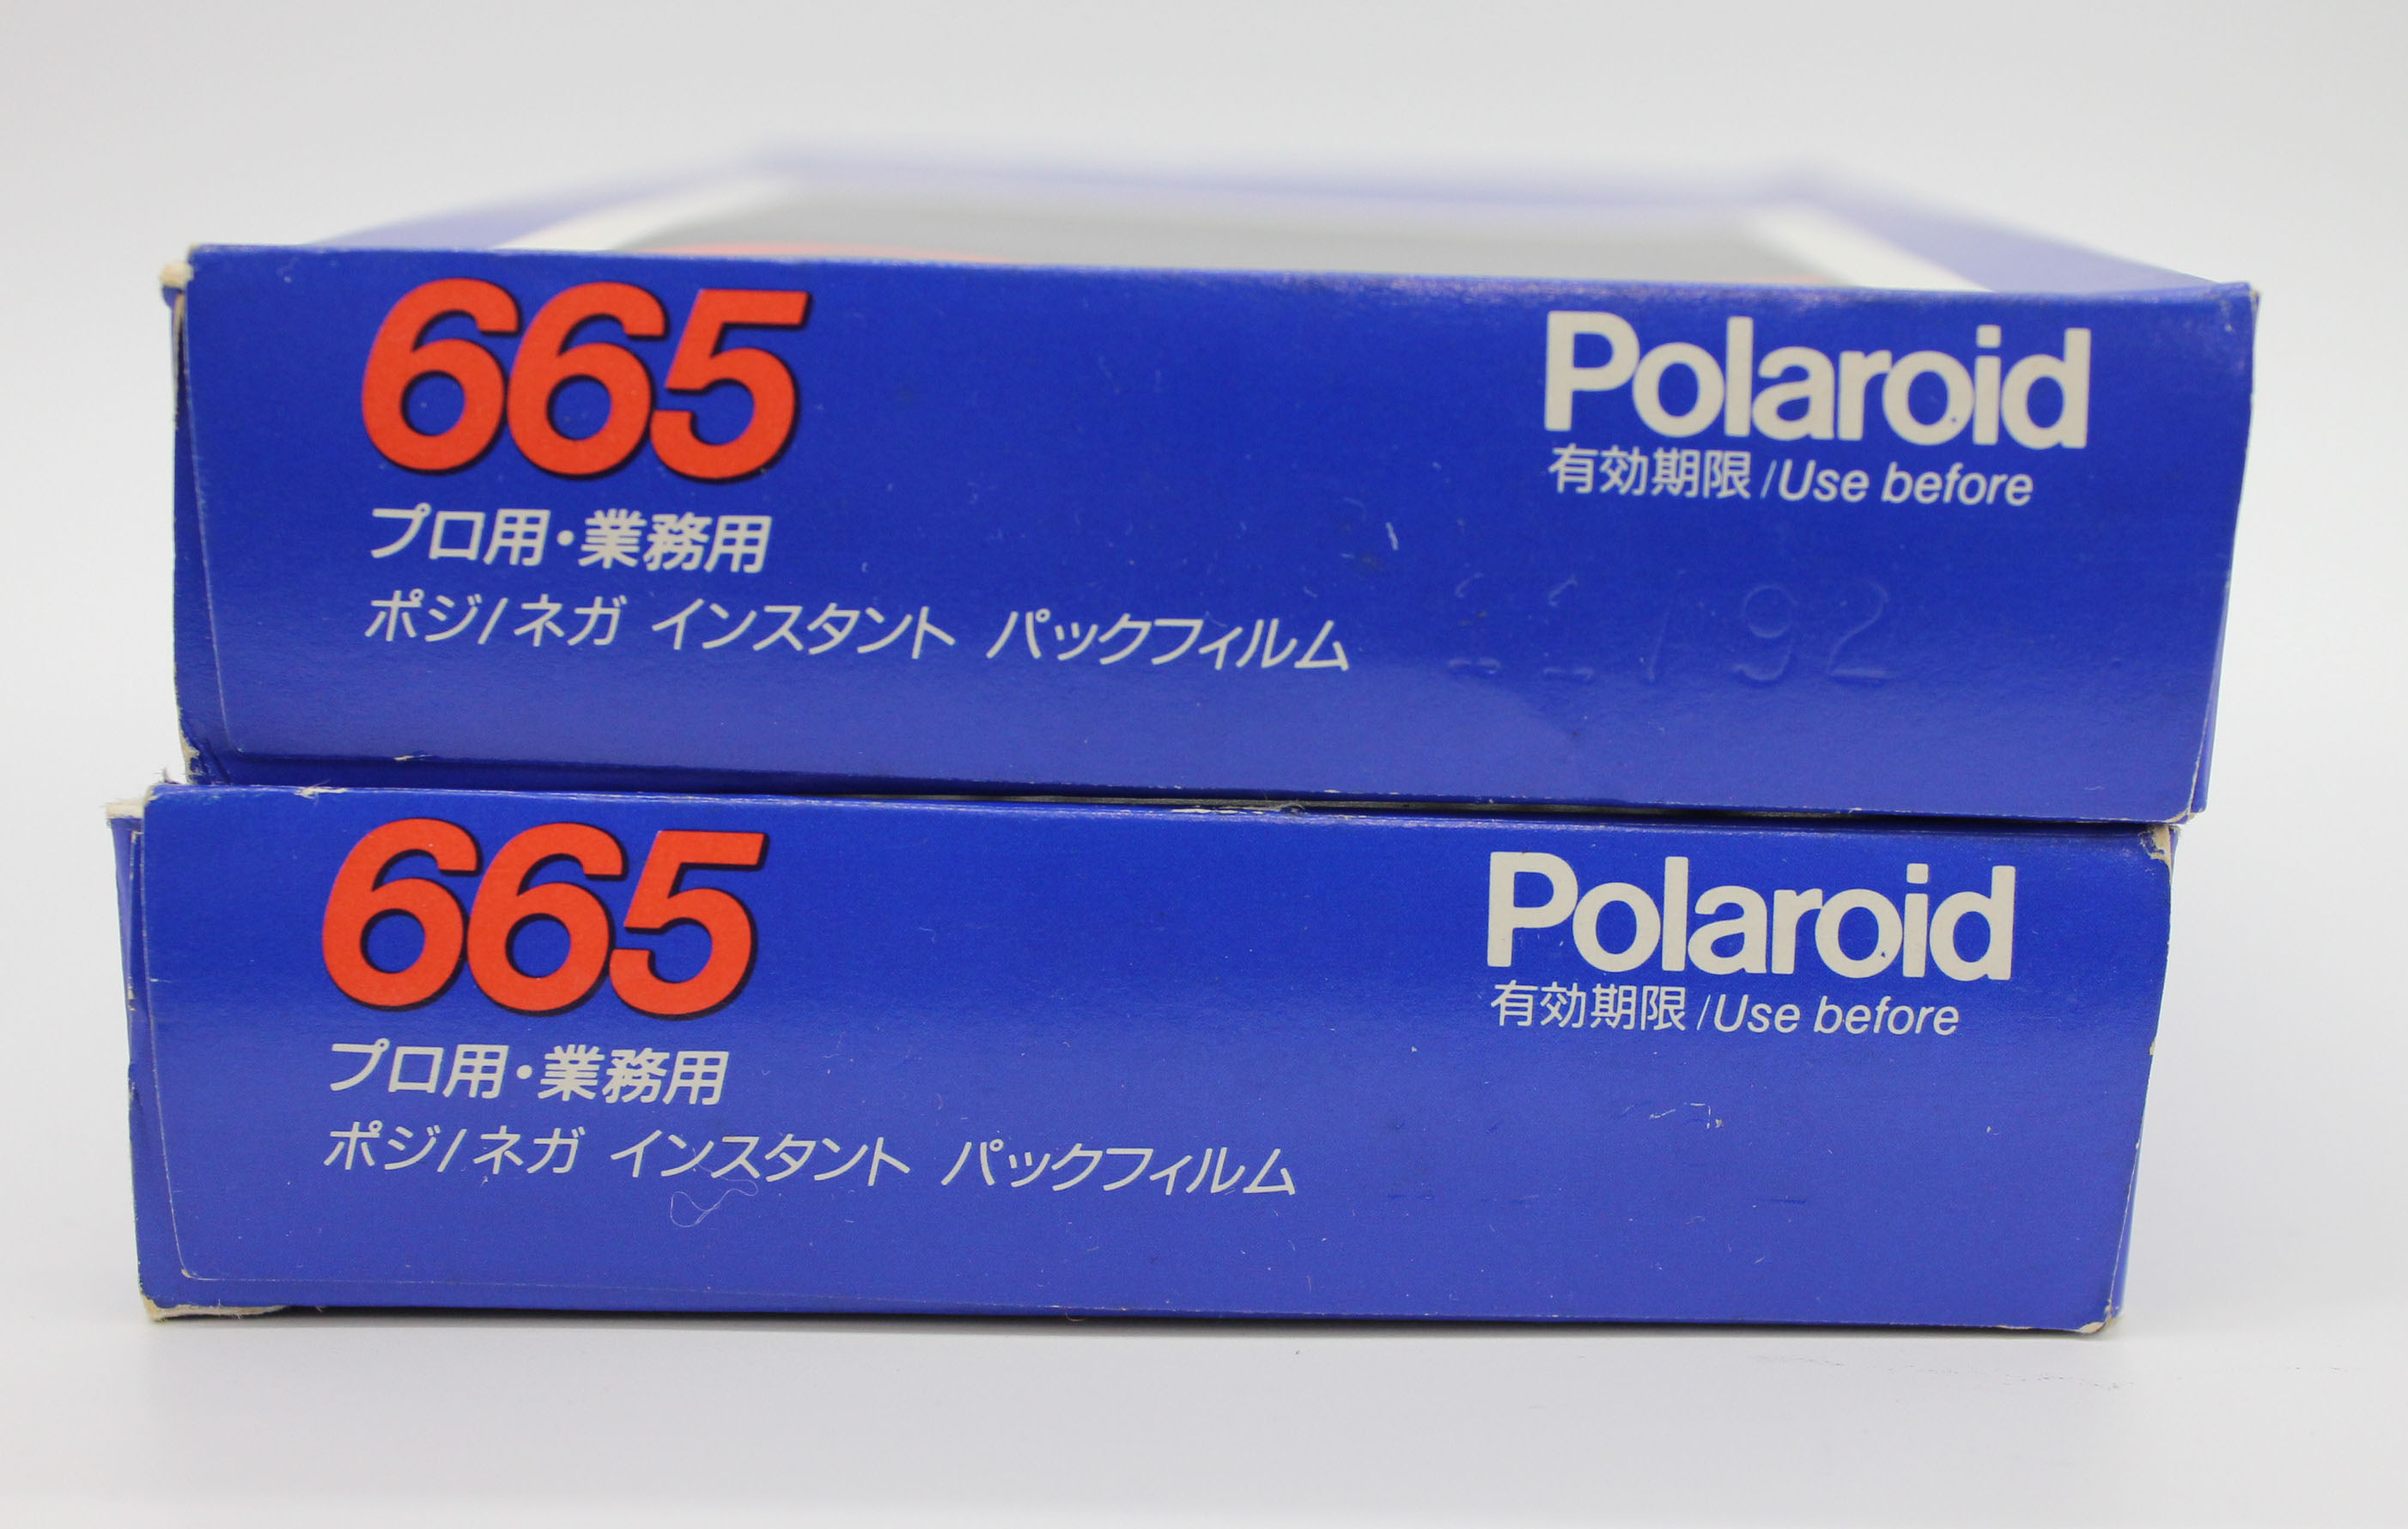  Polaroid 665 Positive / Negative Instant Pack Film (2 Packs) Expired 11/1992 from Japan Photo 3